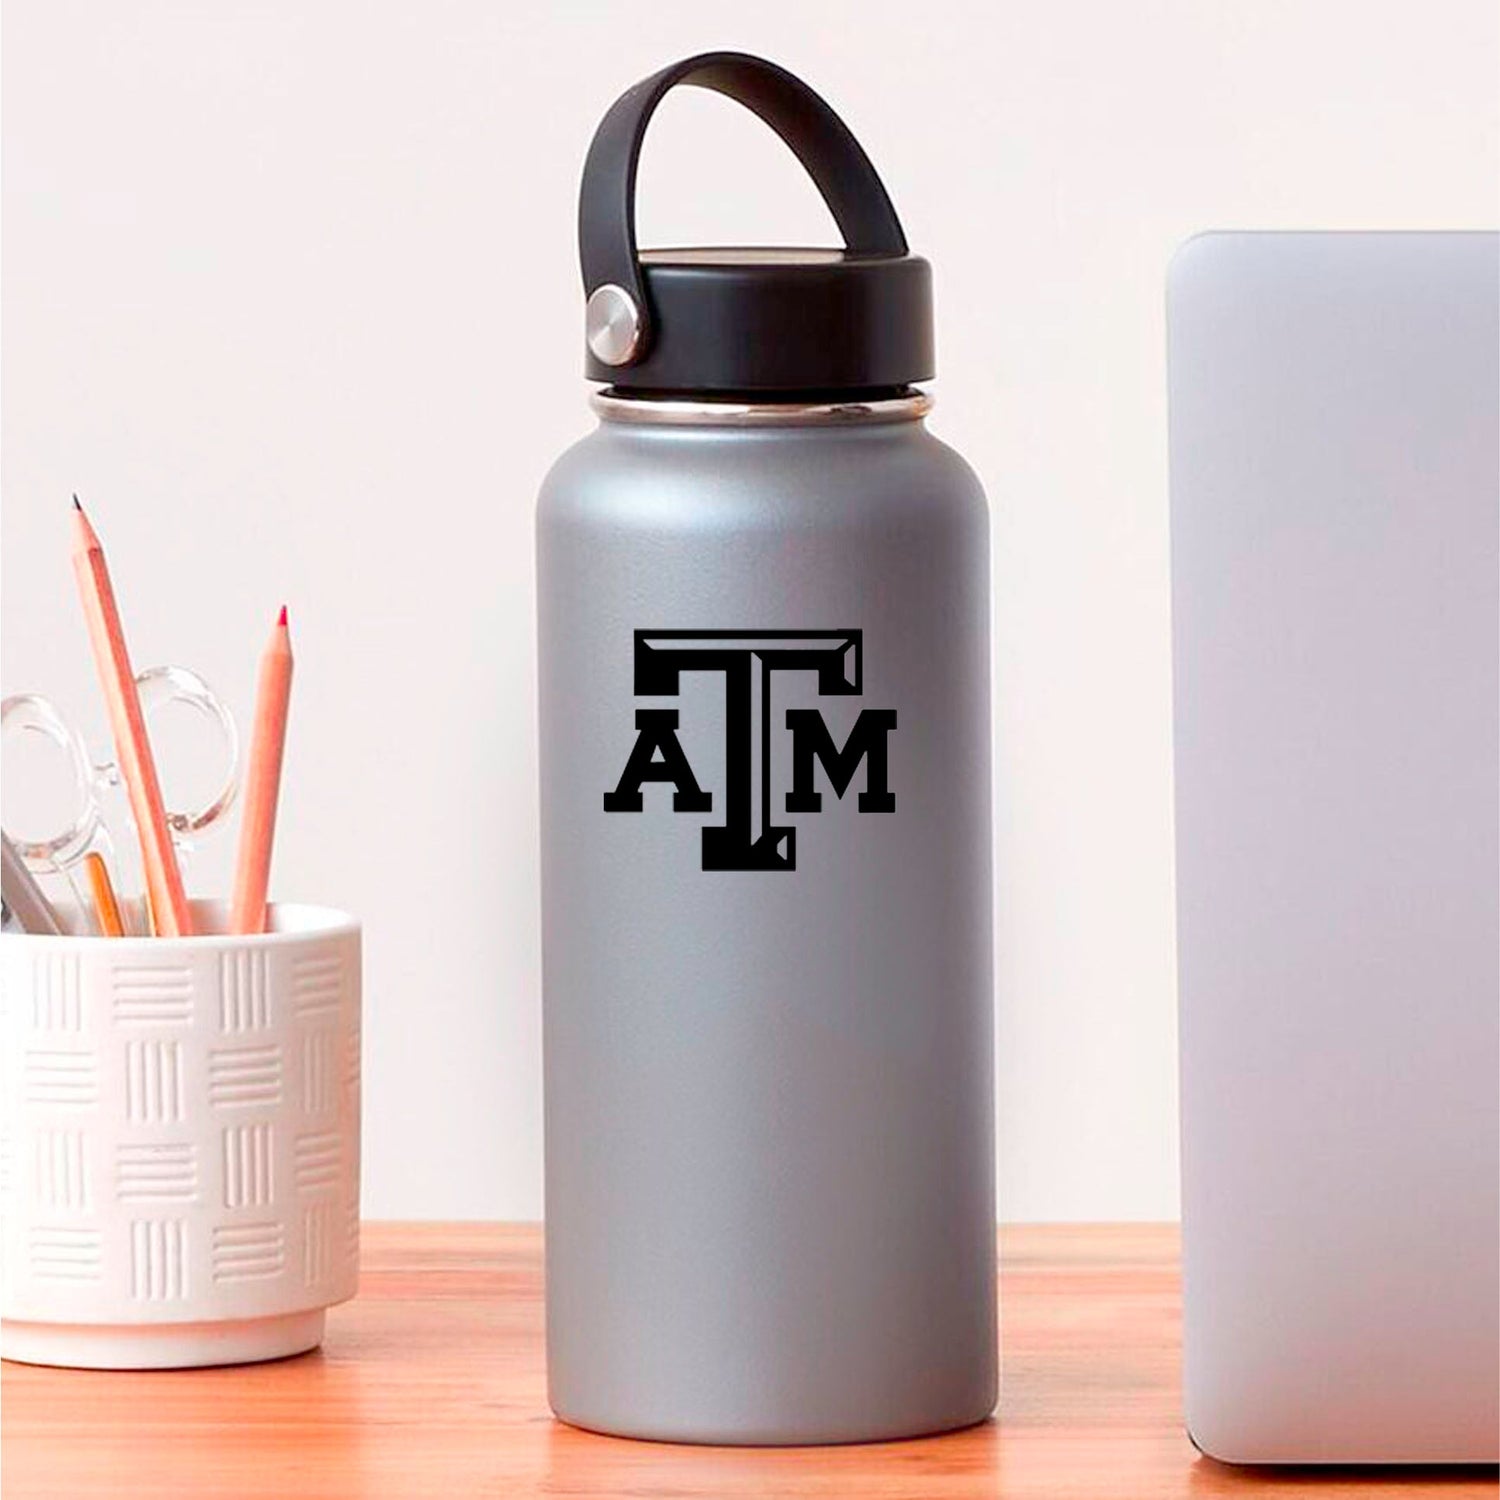 Texas A&M Aggie Small Beveled Black Decal